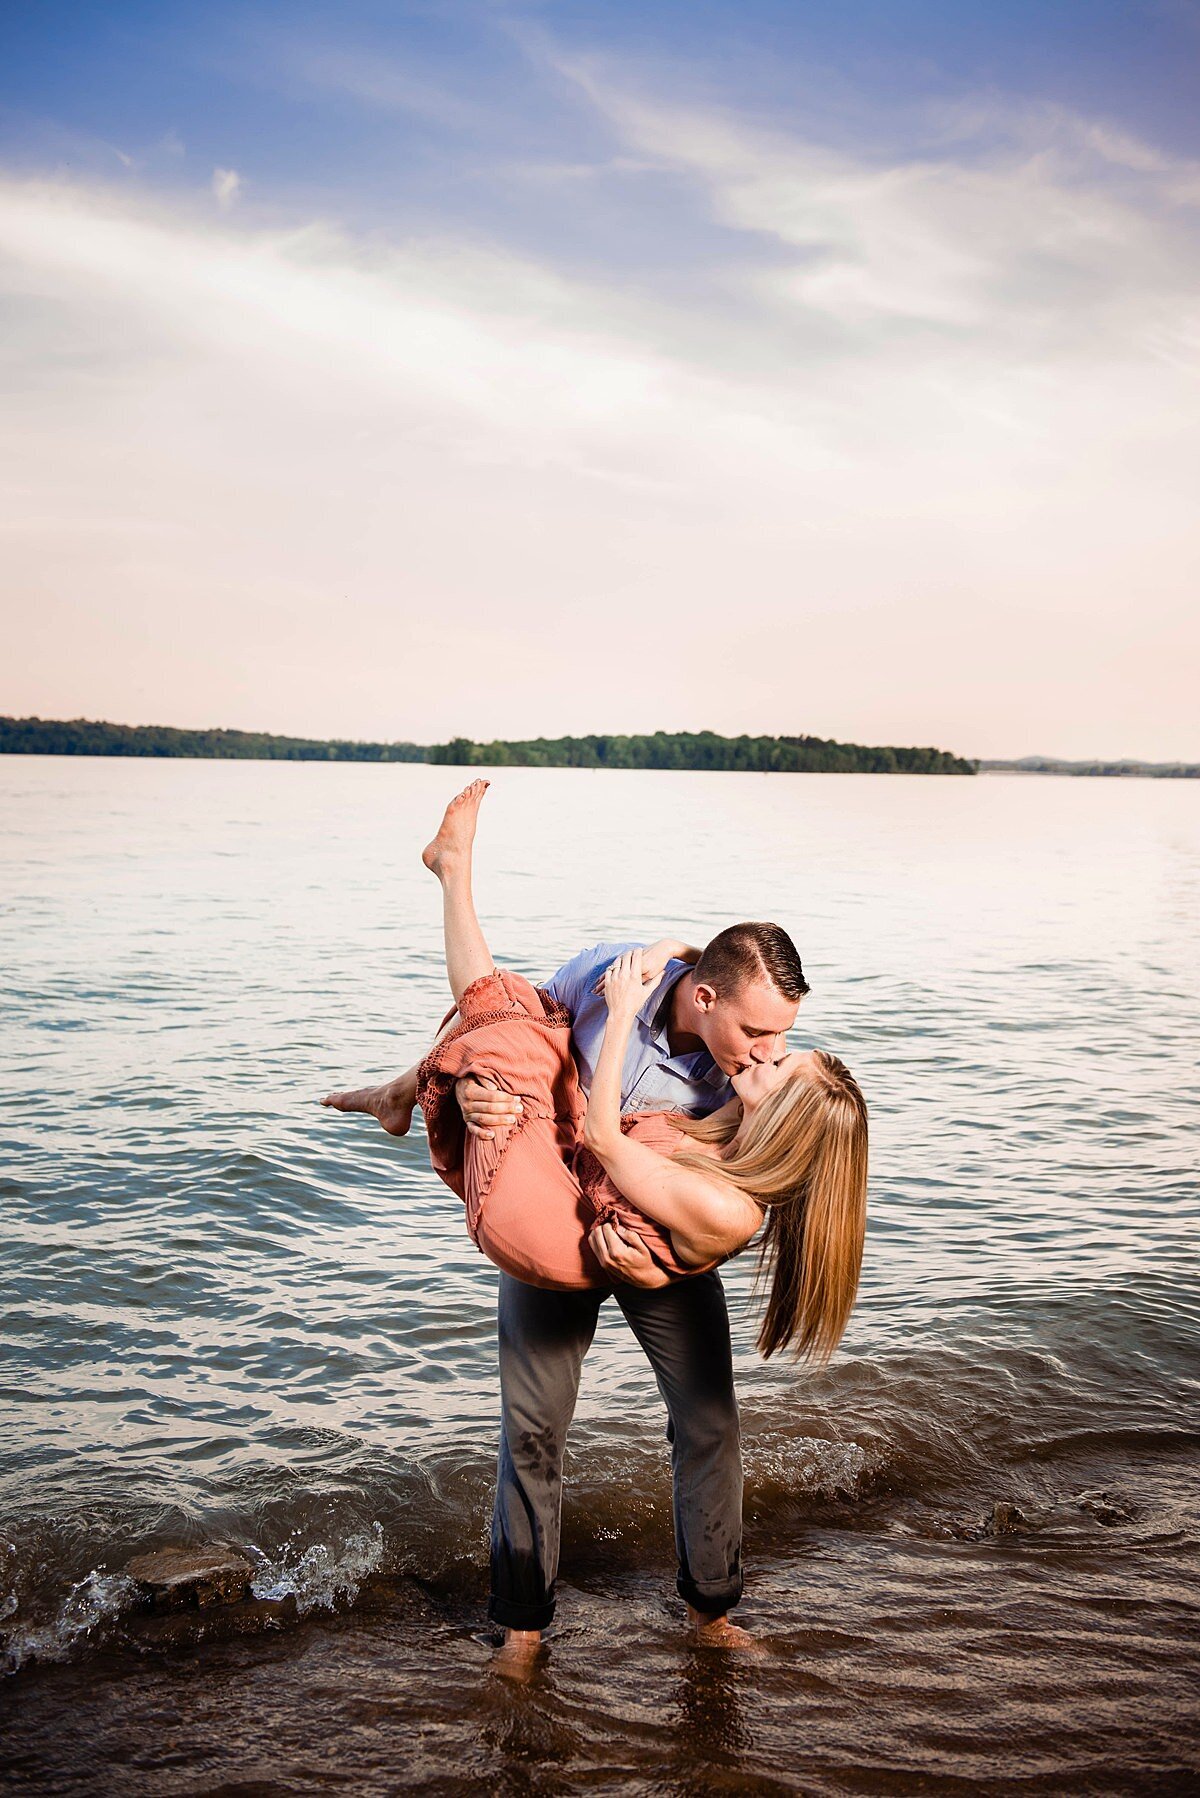 The groom picks the bride up in his arms as he dips her back into a deep kiss. The bride has one bare foot up in the air and her arms around the groom's neck. She is wearing a sleeveless peach sundress. The groom stands barefoot in the waves wearing light gray pants and a light blue shirt.